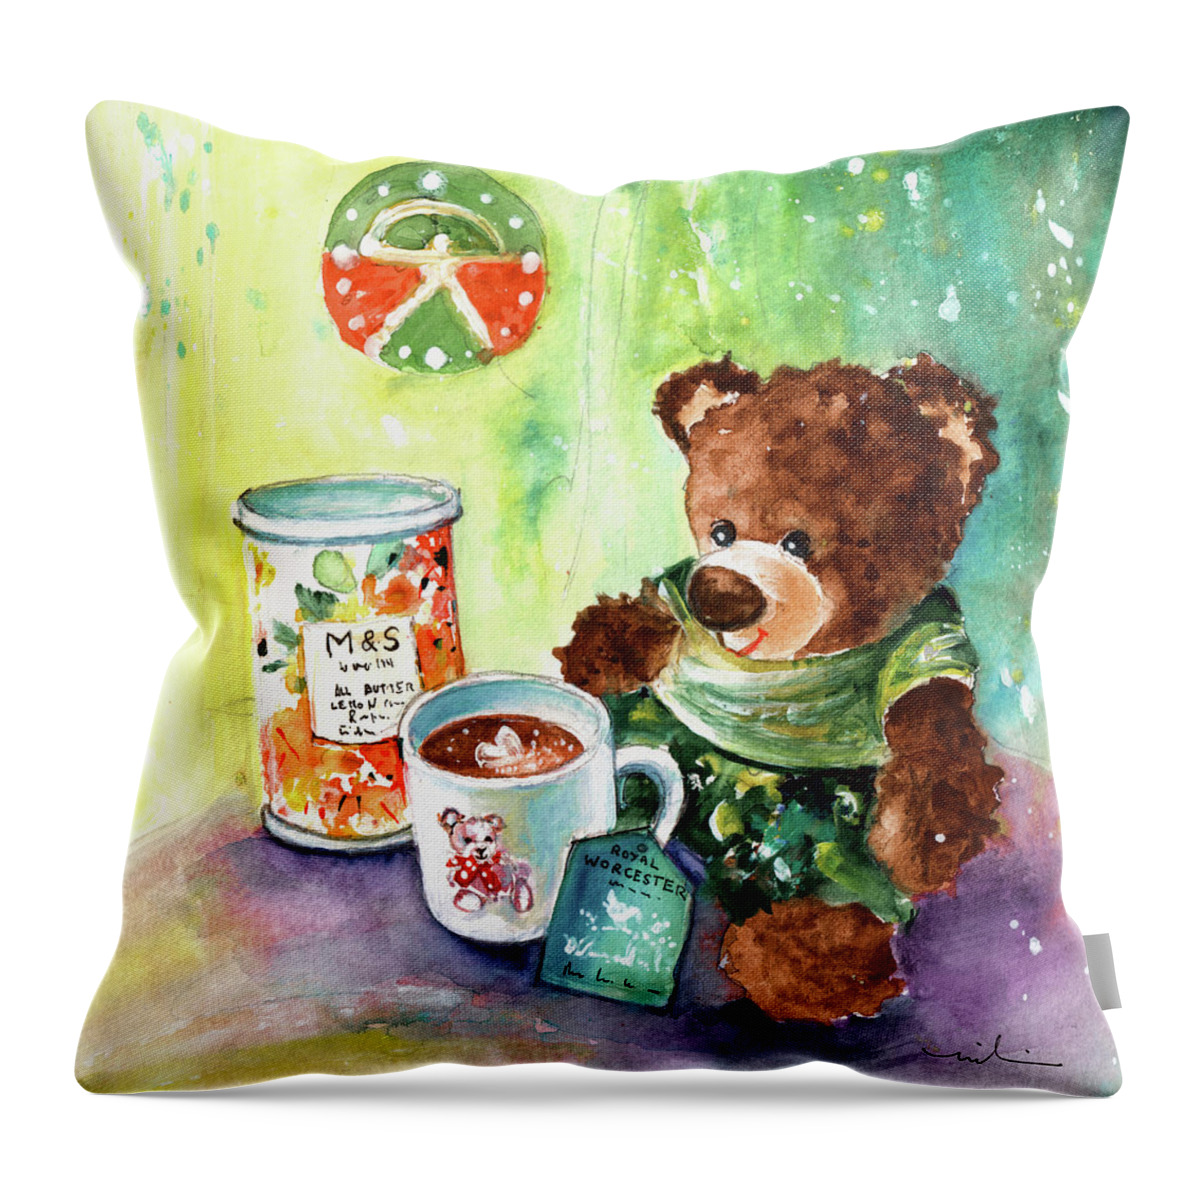 Truffle Mcfurry Throw Pillow featuring the painting Matilda And The Lemon Curd Shortbread by Miki De Goodaboom